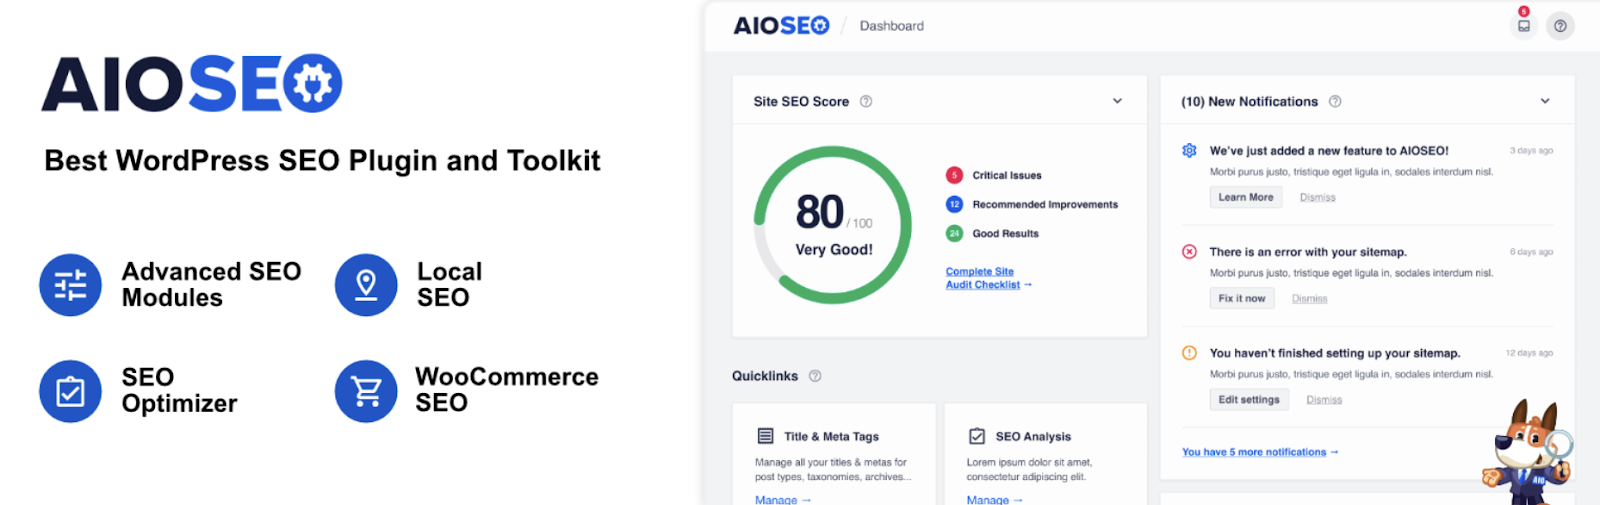 All in One SEO (AIOSE) is one of the author's recommended WordPress SEO plugins, as well as one of the most popular. Beginner-friendly.